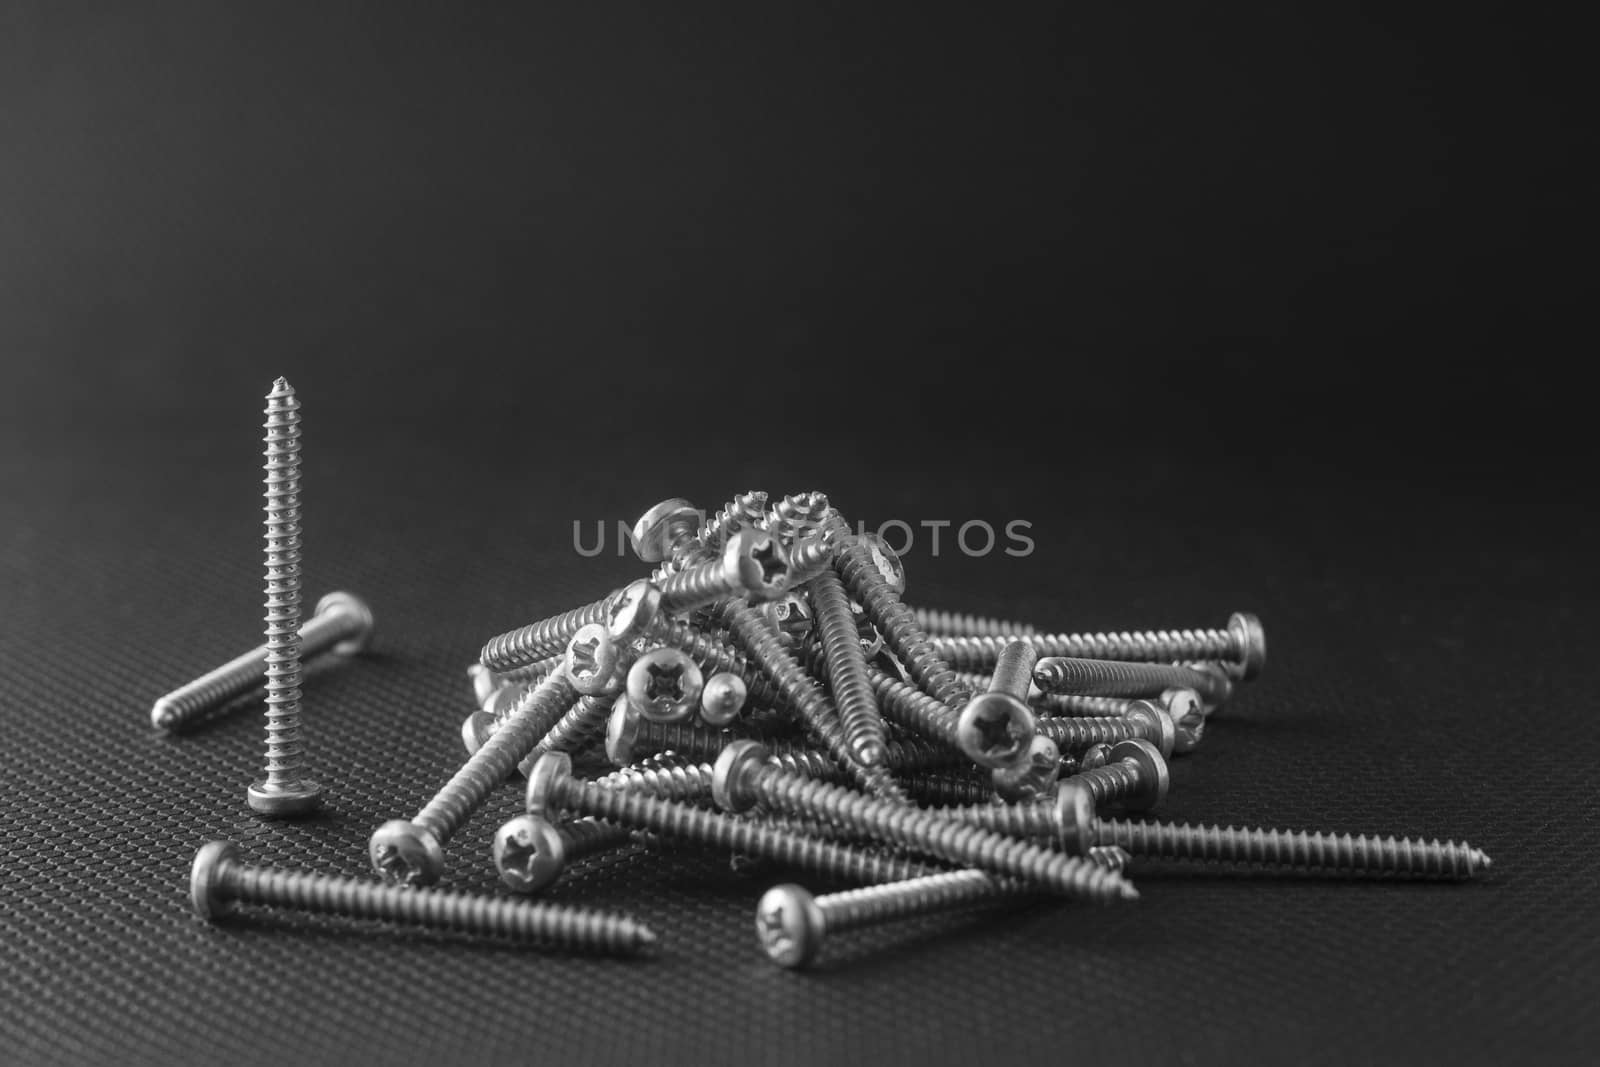 Screws located on a black background by mailos